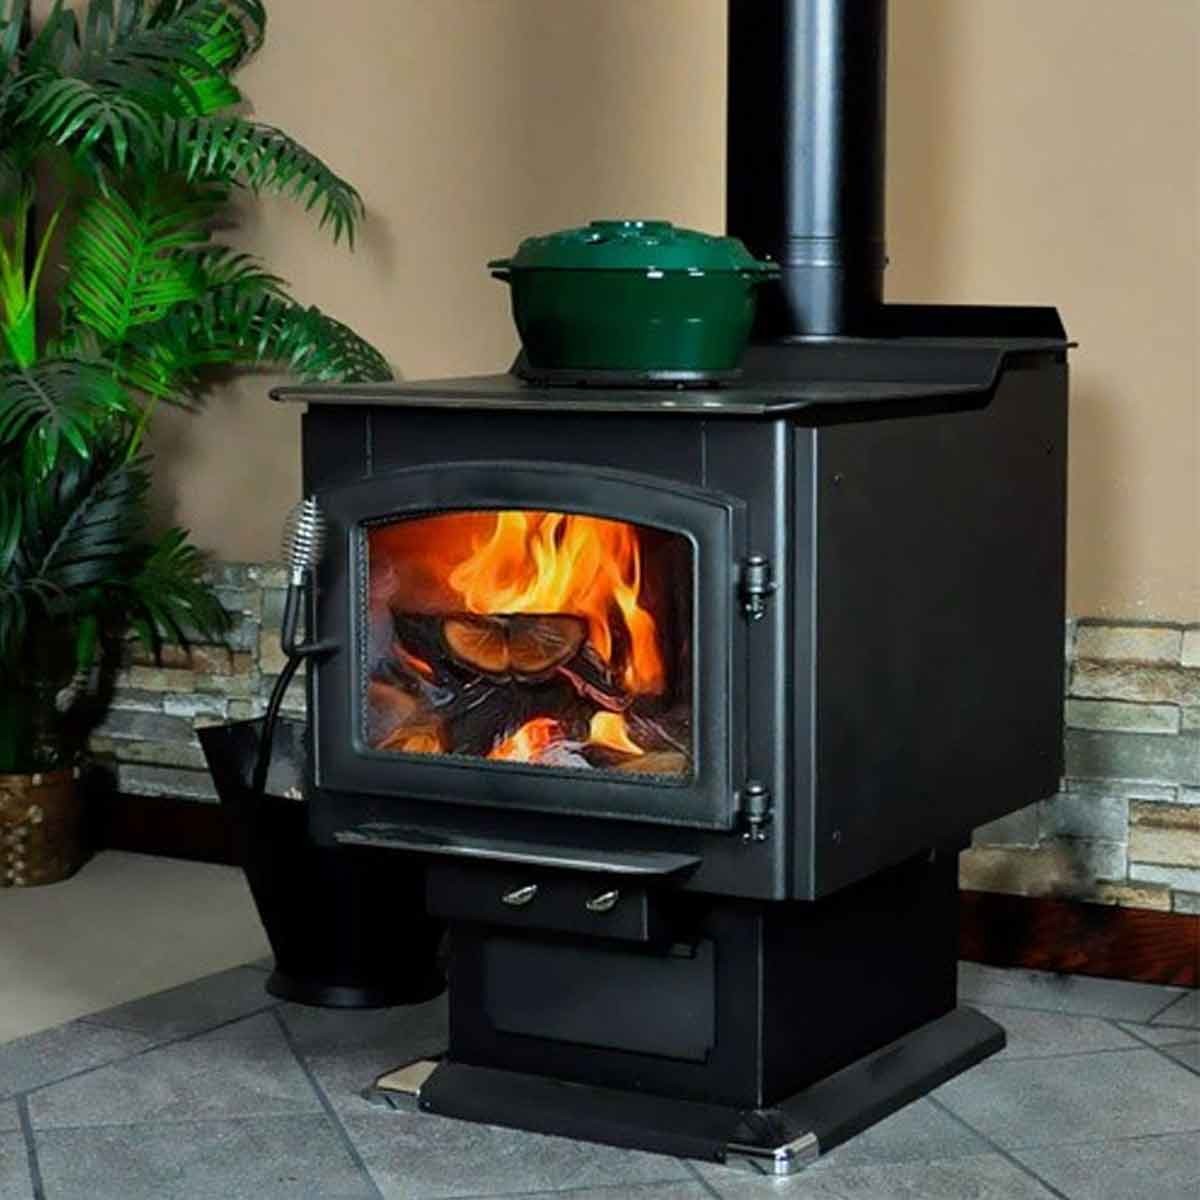 Majestic Fireplace Blower Unique Wood Burning Fireplaces Mobile Homes Charming Fireplace